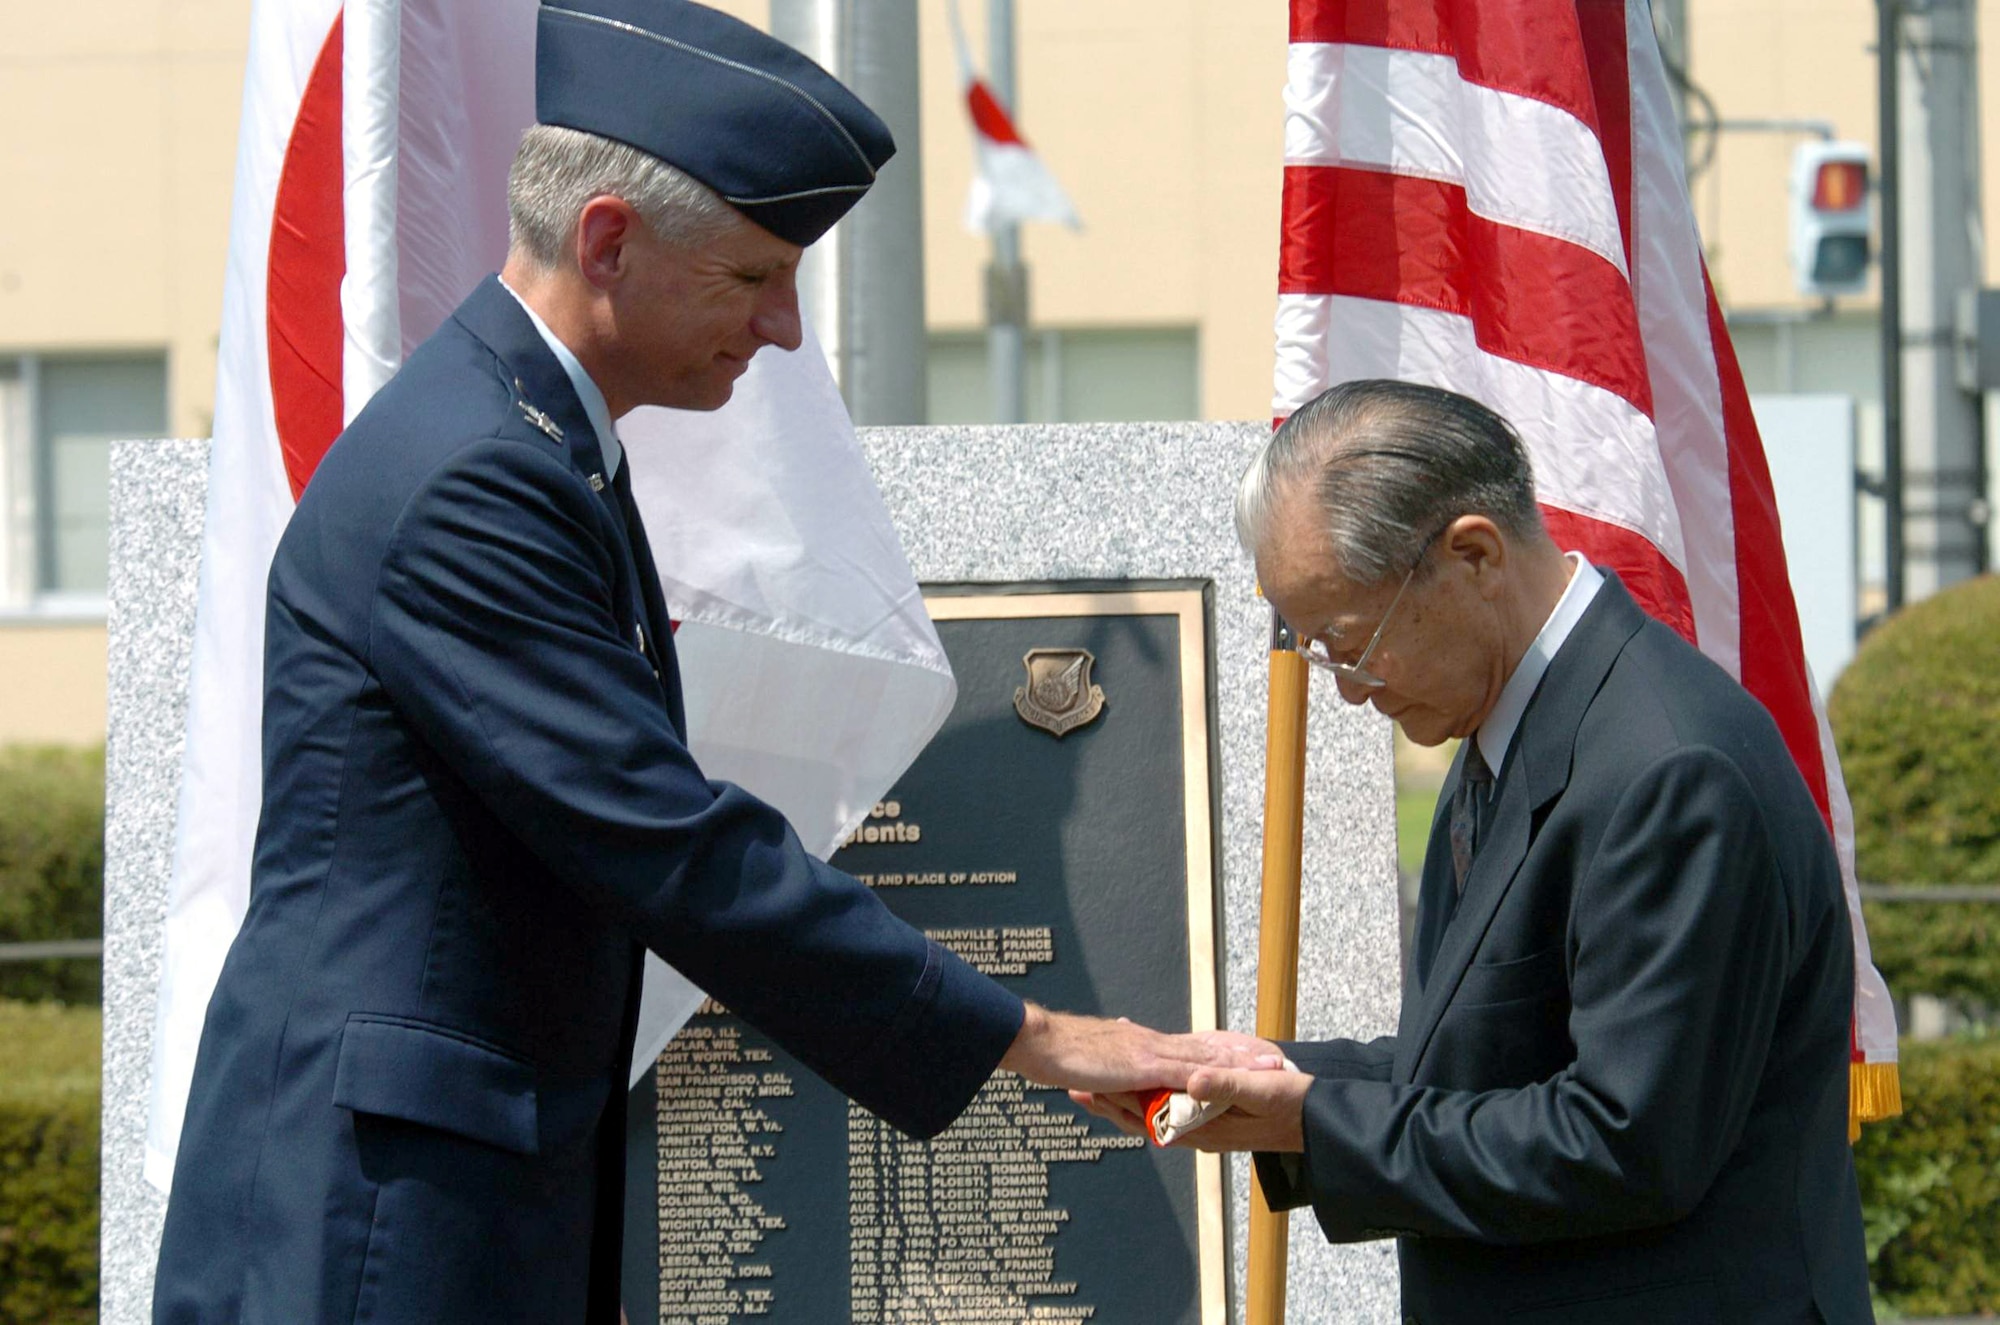 YOKOTA AIR BASE, Japan -- Col. Mark Schissler (left) returns a Japanese flag to Manshichi Saeki during a ceremony here Aug. 6.  The flag belonged to Mr. Saeki's older brother who died fighting against American forces during World War II.  Colonel Schissler is commander of the 374th Airlift Wing.  (U.S. Air Force photo by Master Sgt. Val Gempis)